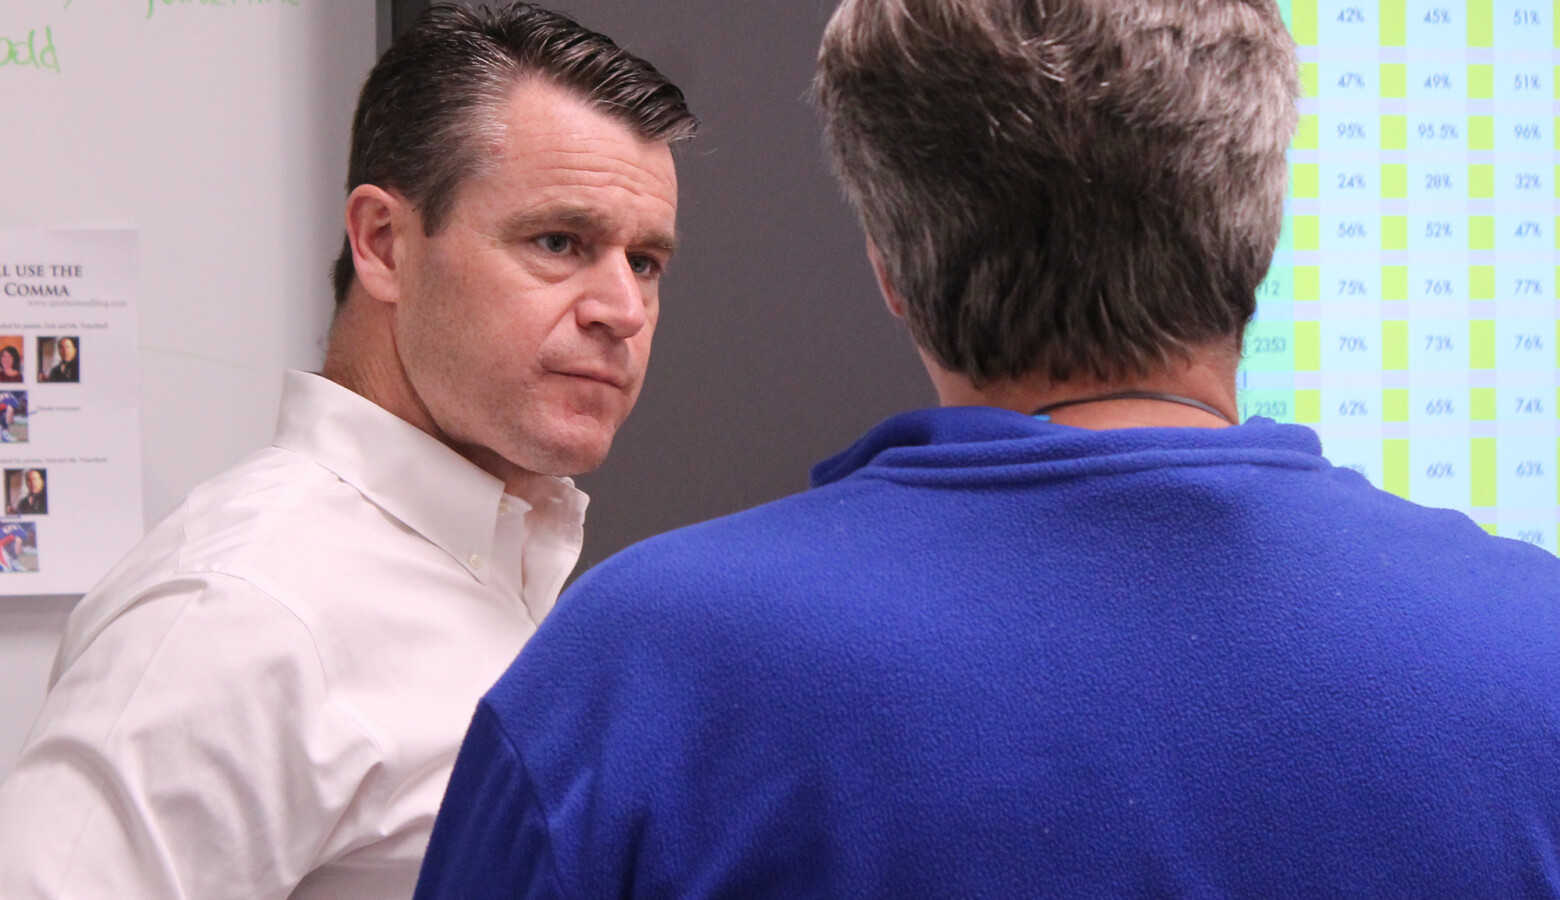 U.S. Sen. Todd Young (R-Ind.) says thousands of Indiana small businesses have been approved for disaster loans to help them survive the COVID-19 crisis. (Lauren Chapman/IPB News)